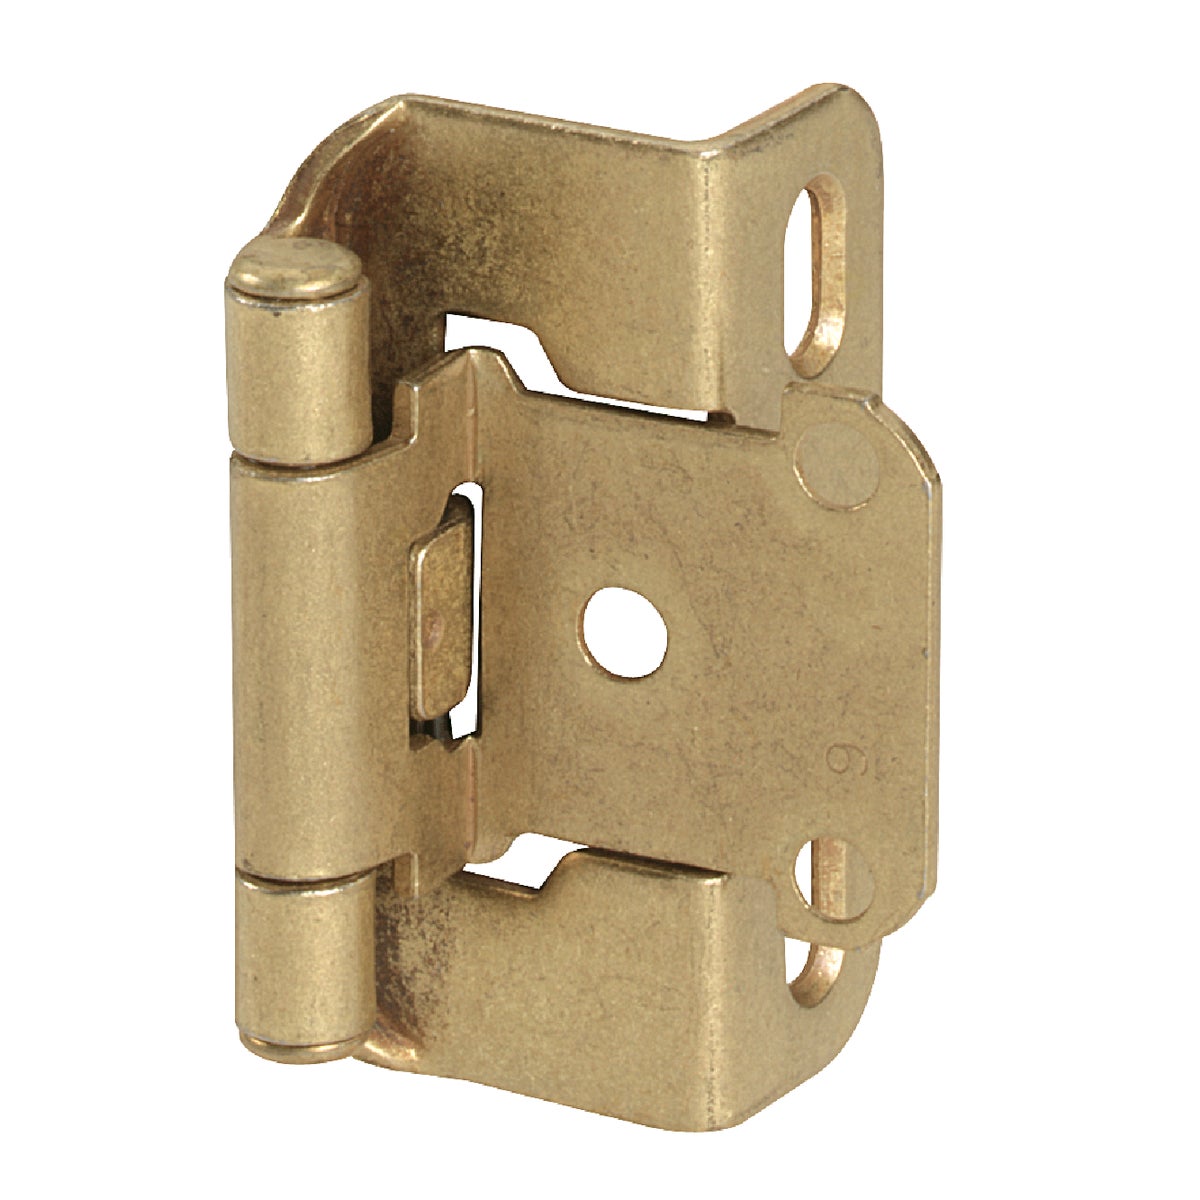 Amerock Burnished Brass Self-Closing Partial Wrap Overlay Hinge (2-Pack)